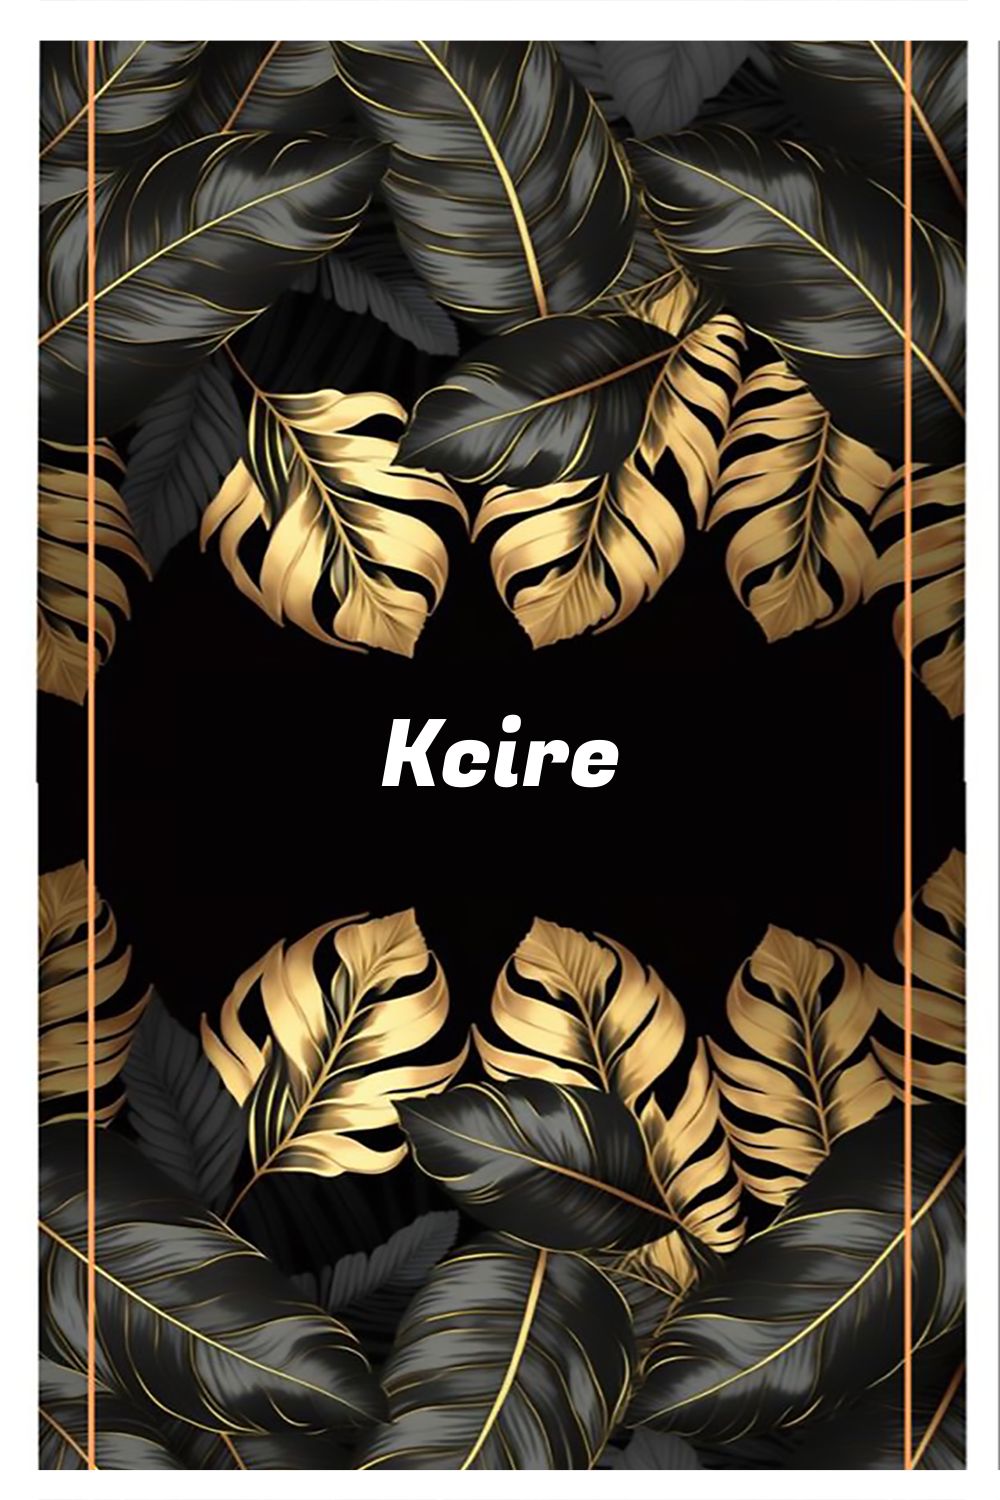 Kcire Name Meaning -  Origin and Popularity